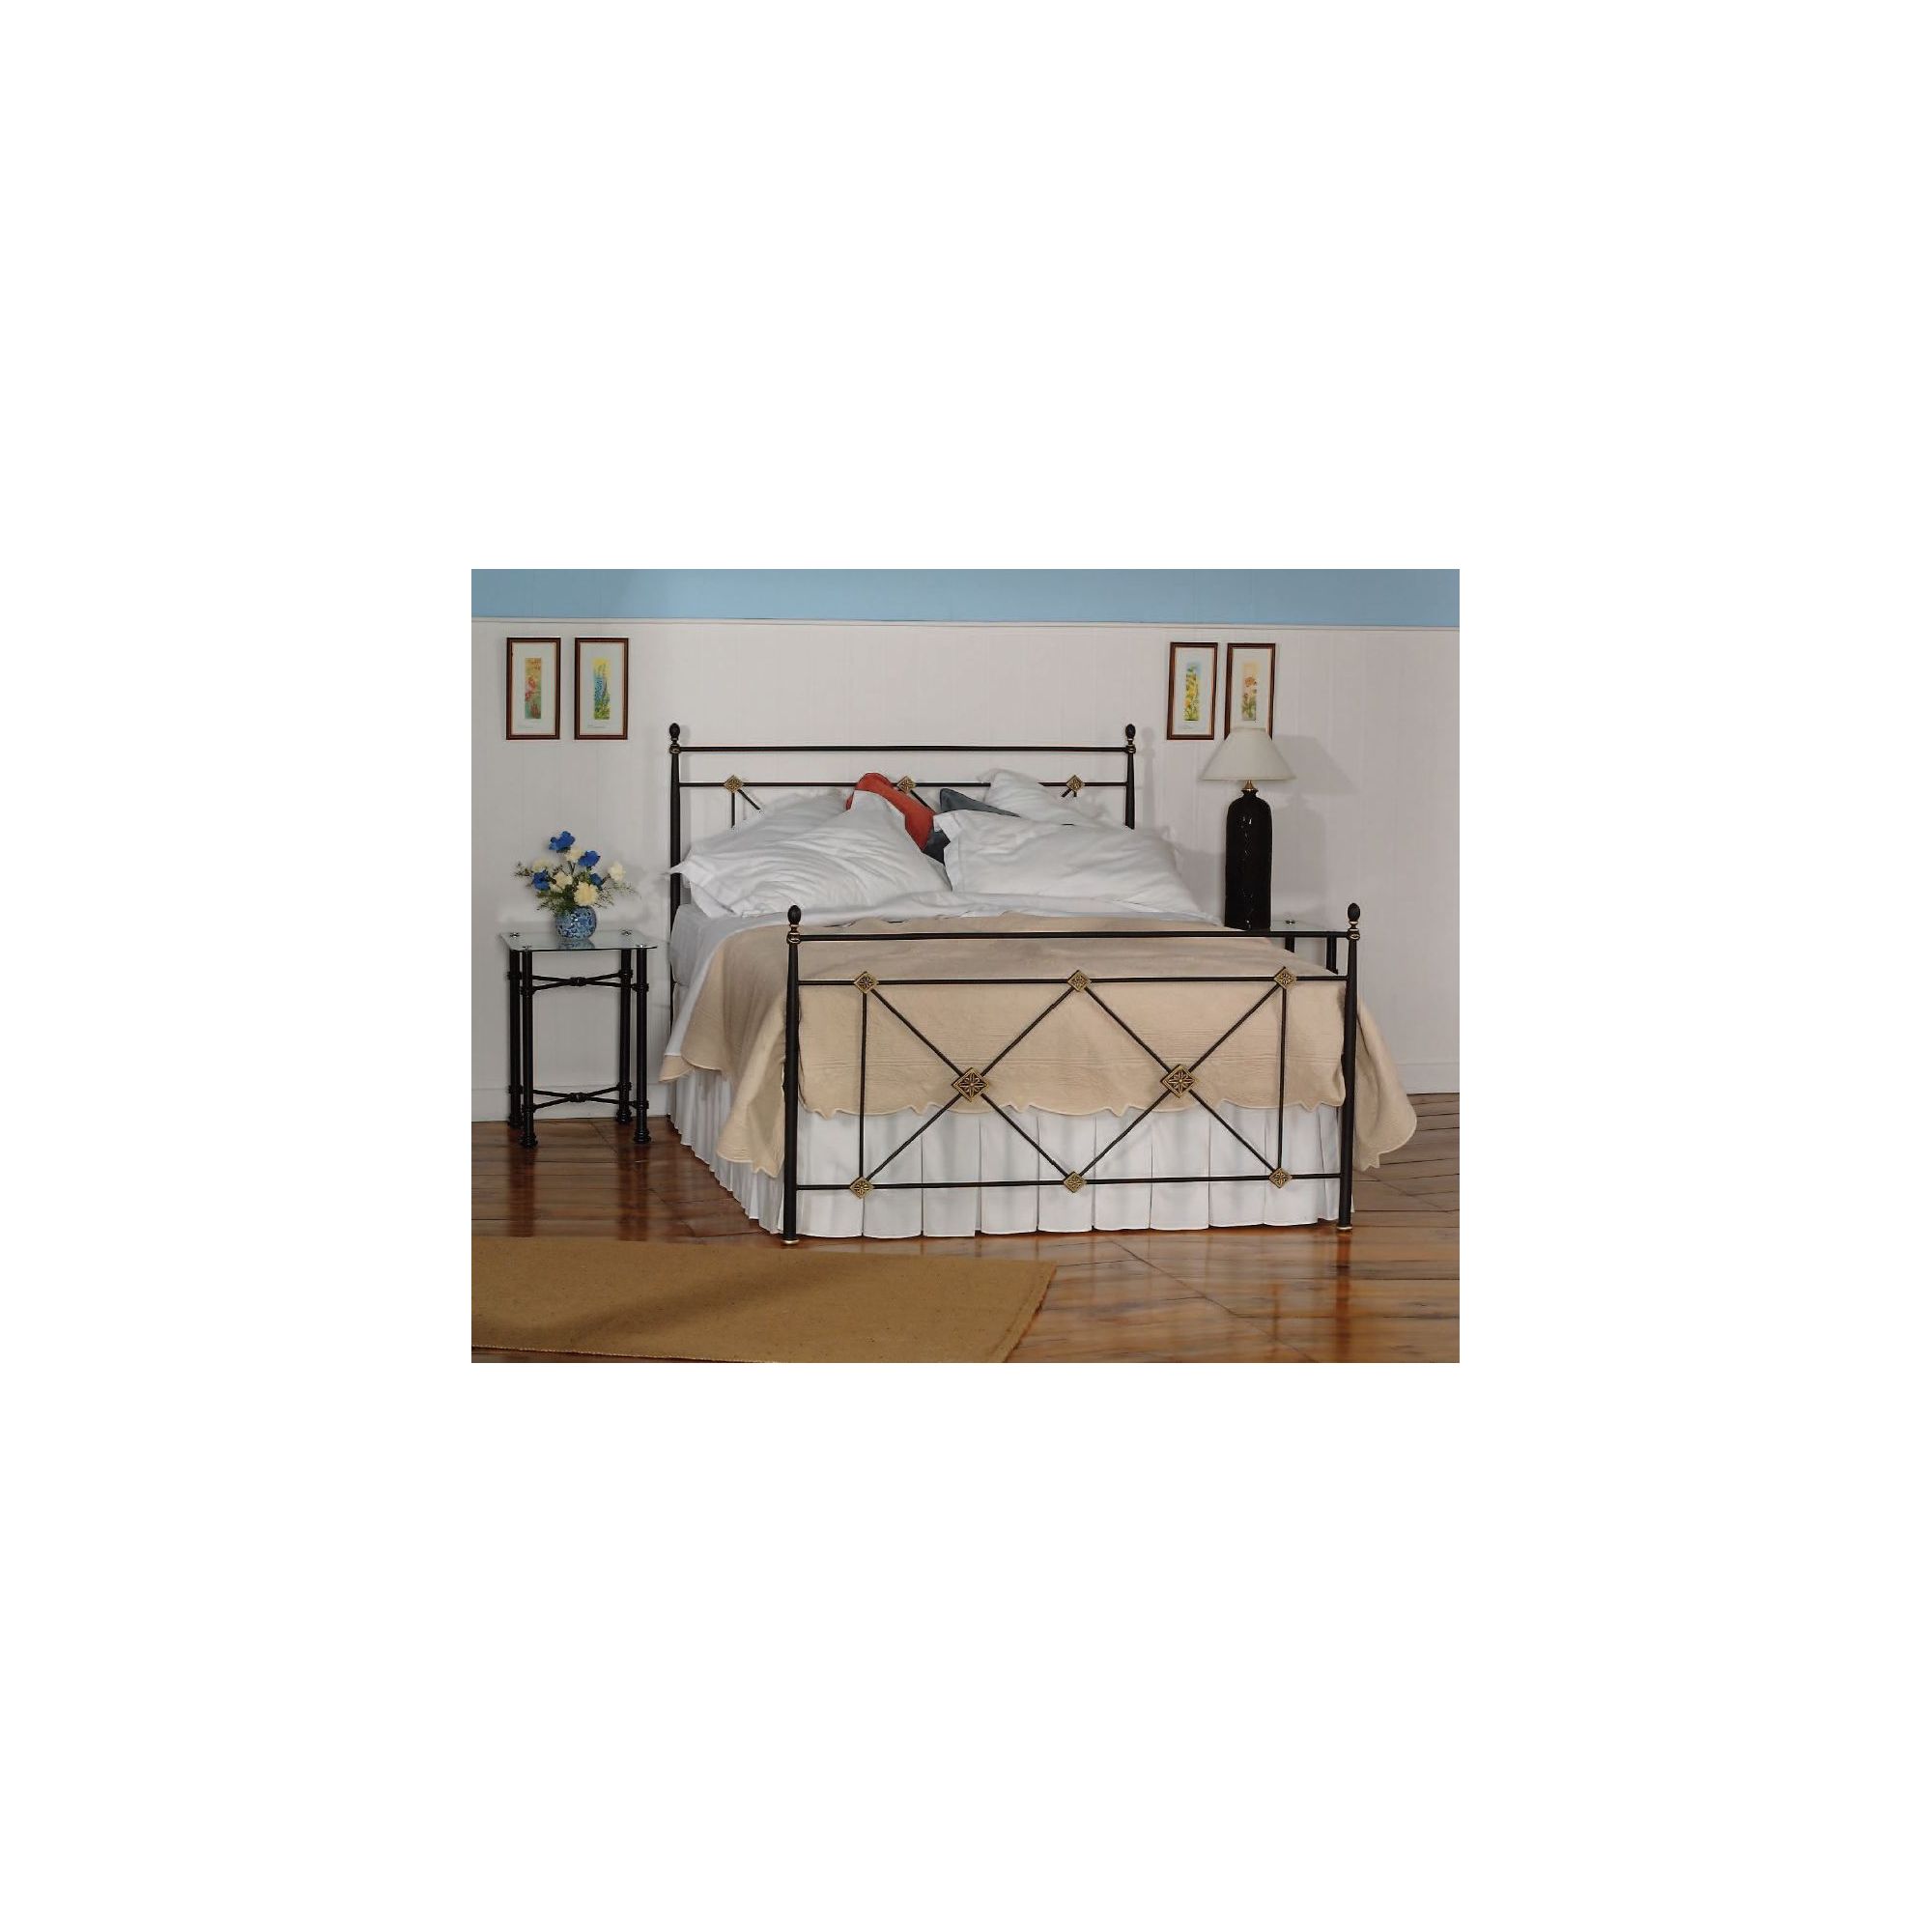 OBC Maine Bed Frame - King - Satin Black at Tesco Direct